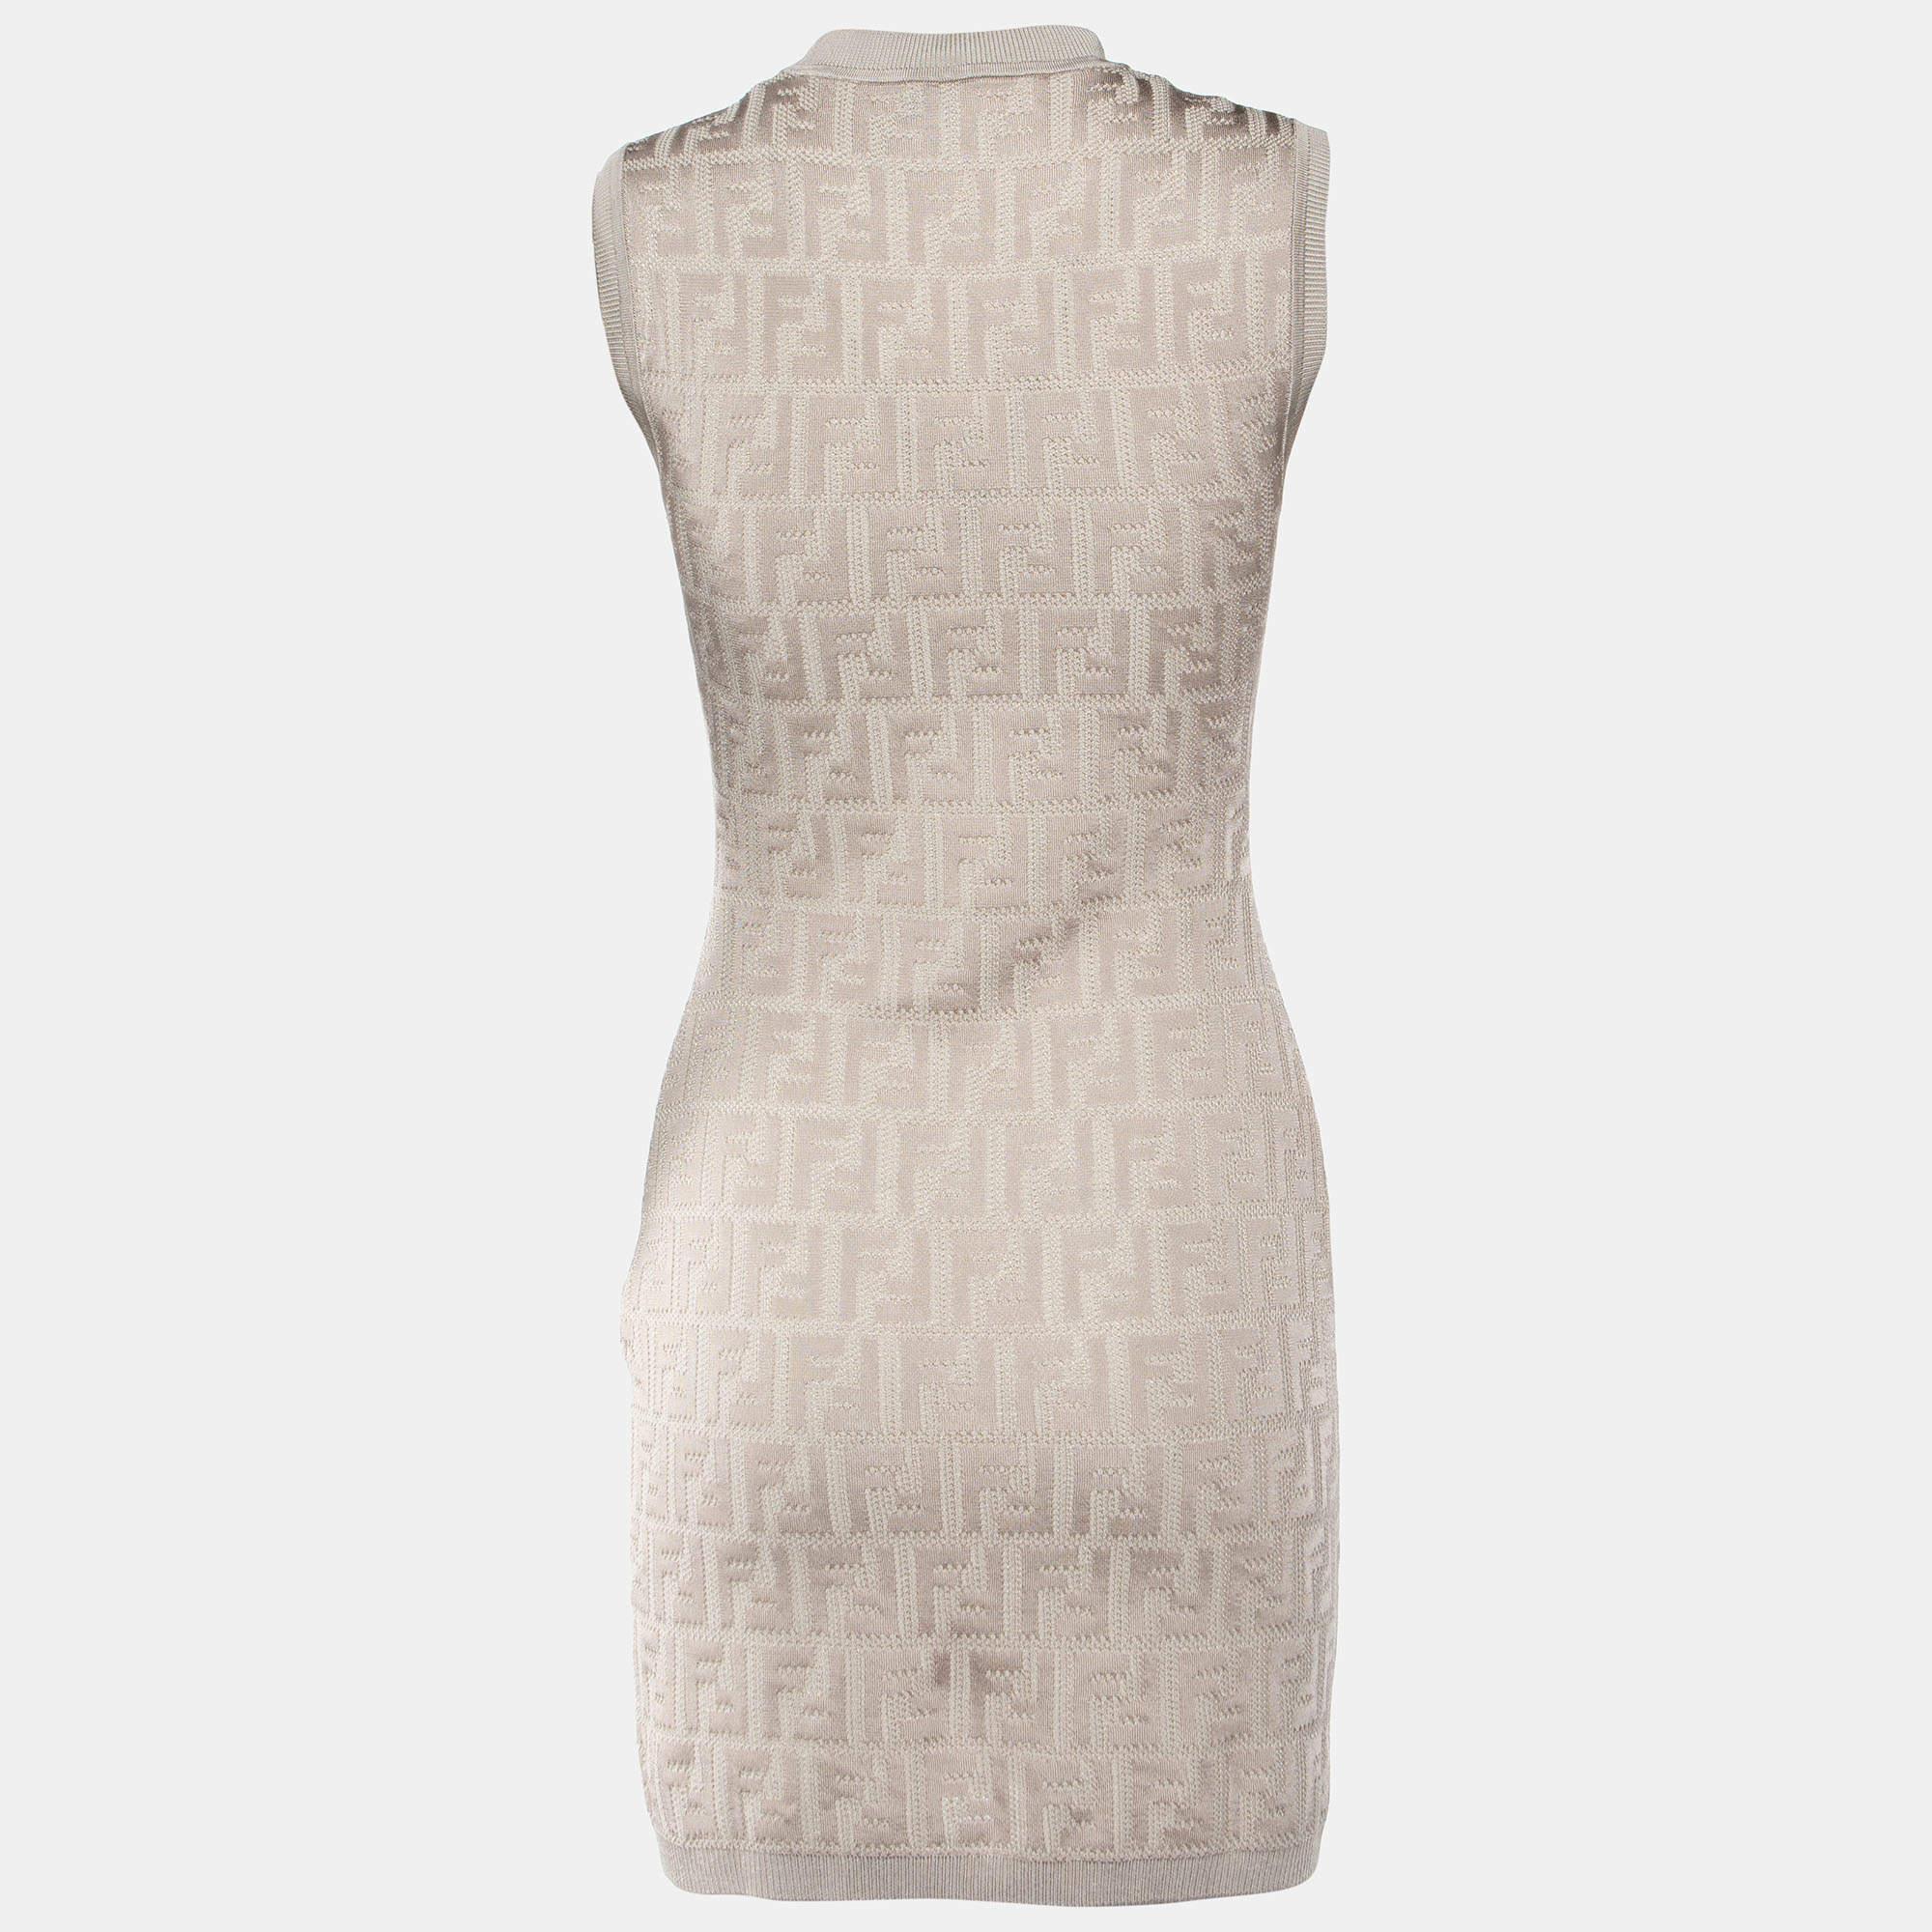 Effortlessly made into a chic design, this Fendi dress is easy to wear and easy to accessorize. Tailored beautifully, the dress is sure to remain a favorite season after season.

Includes: Price Tag